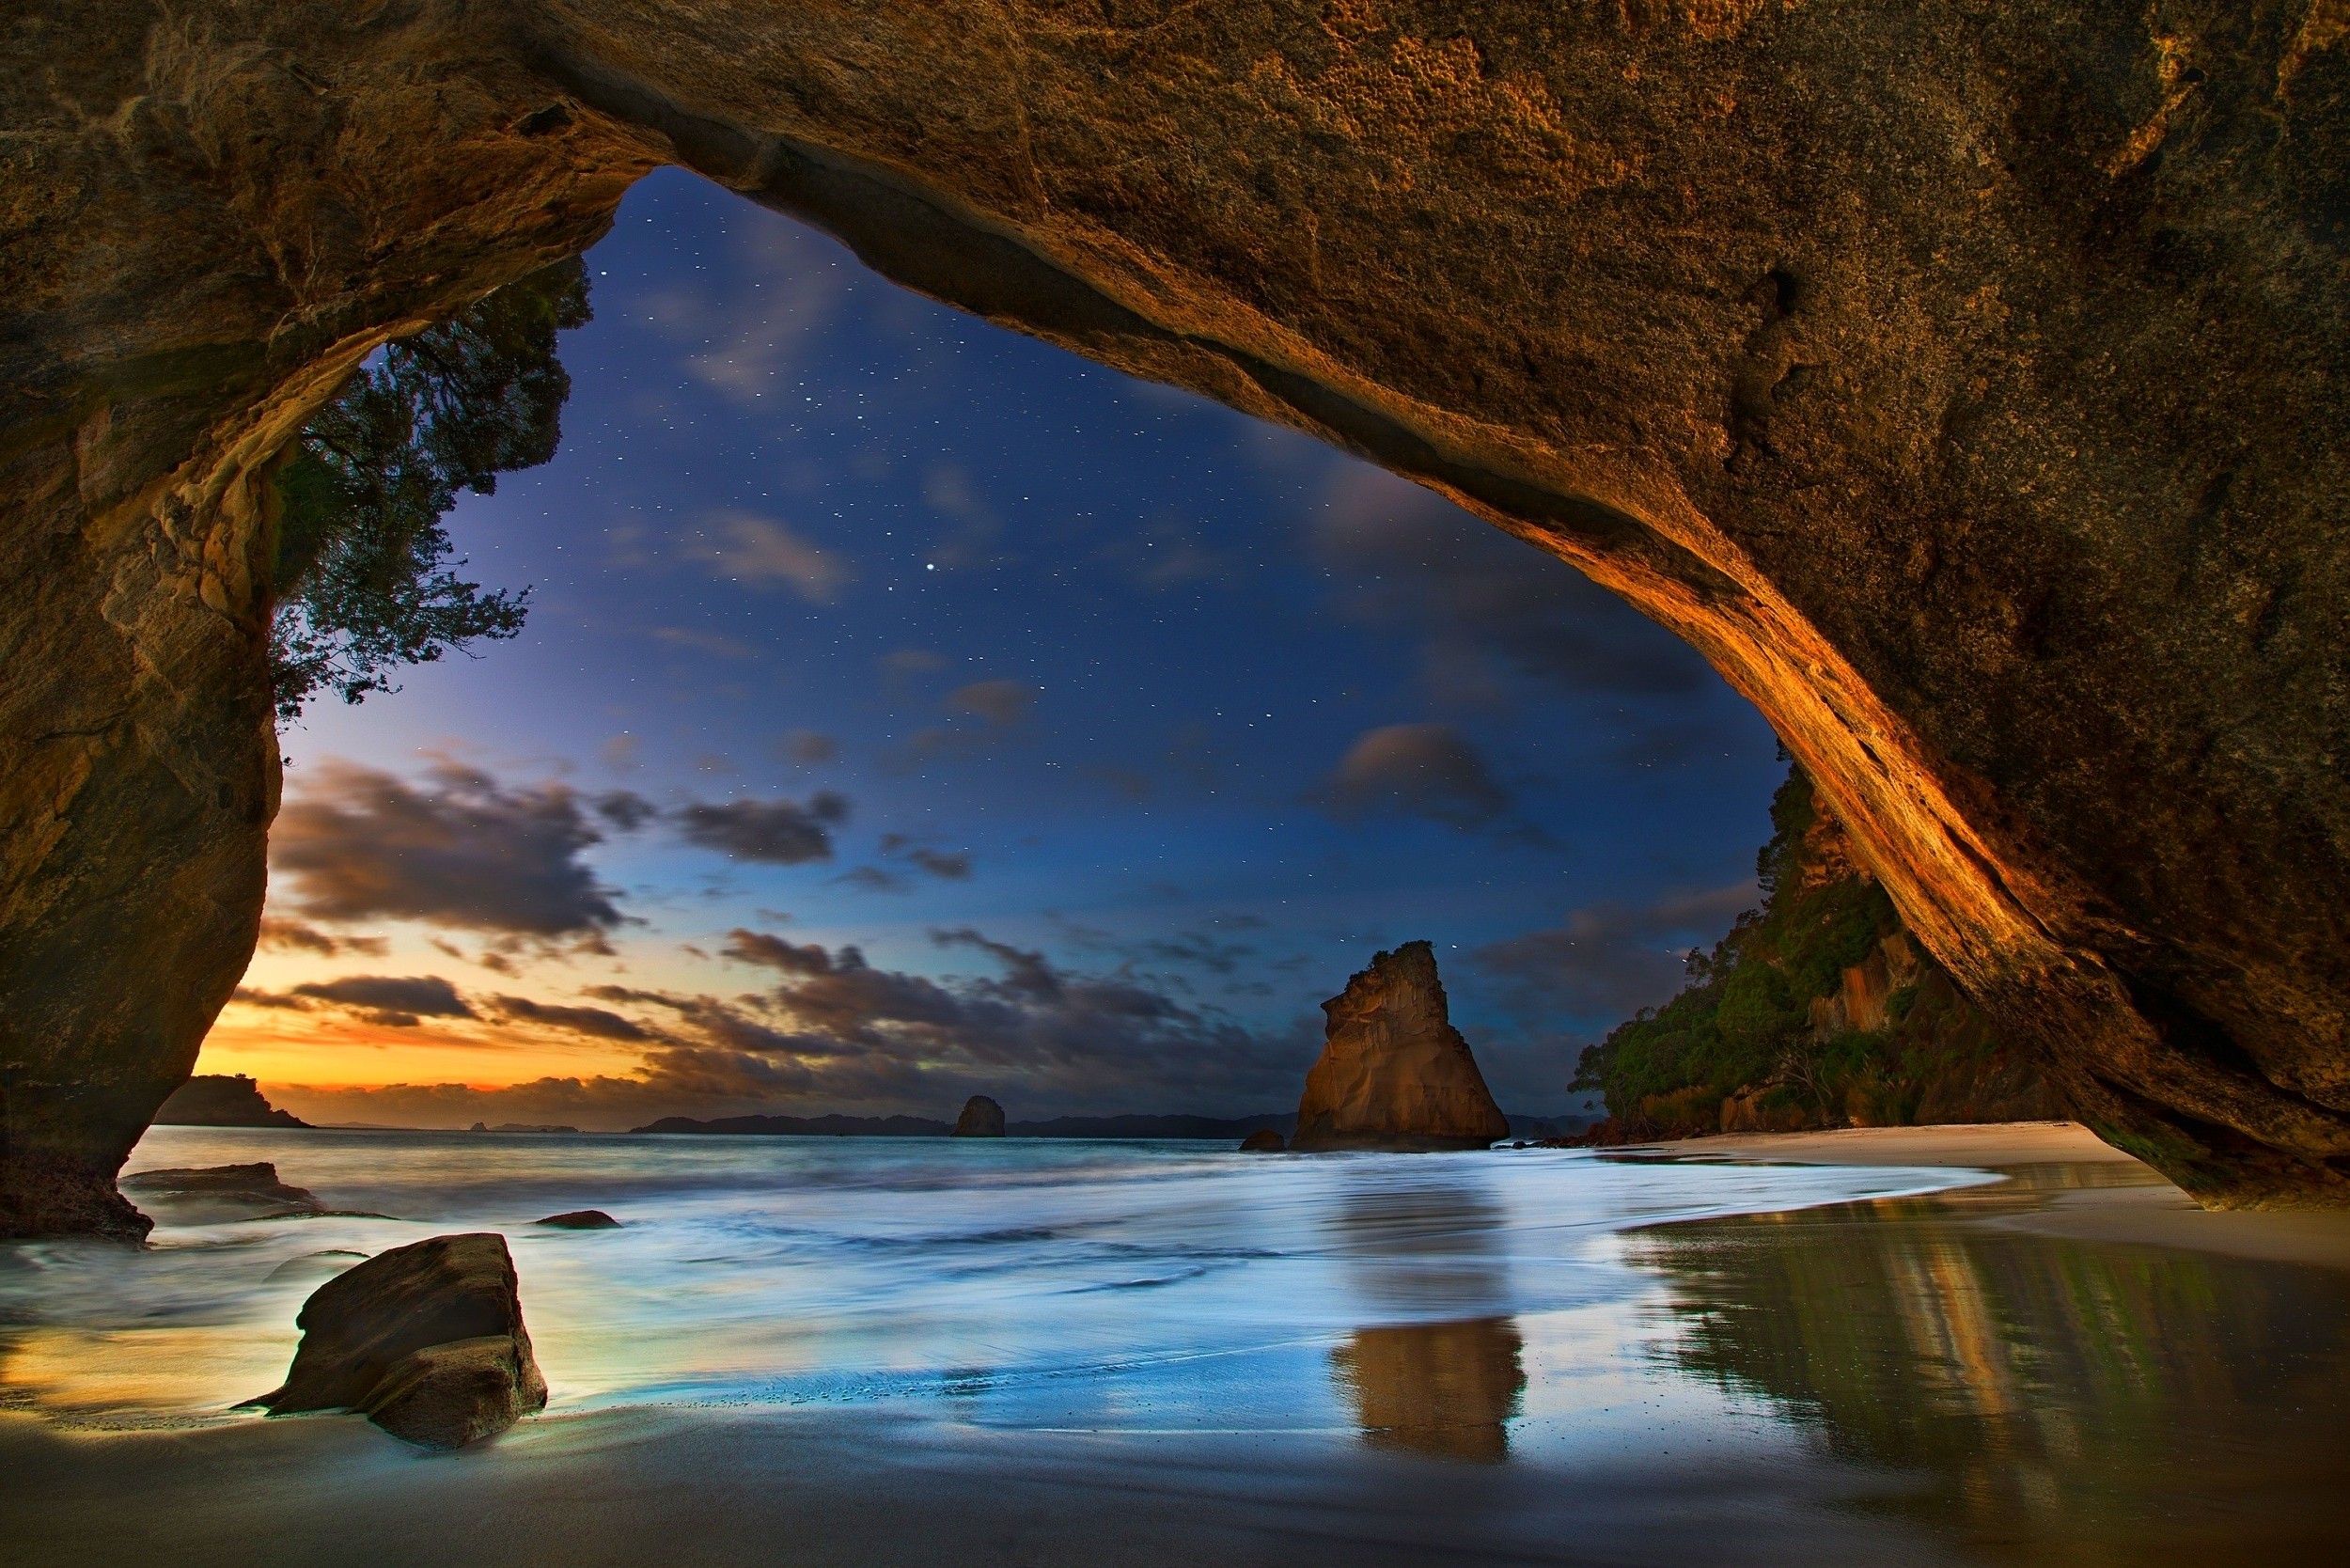 Beach Cave Wallpapers Wallpaper Cave